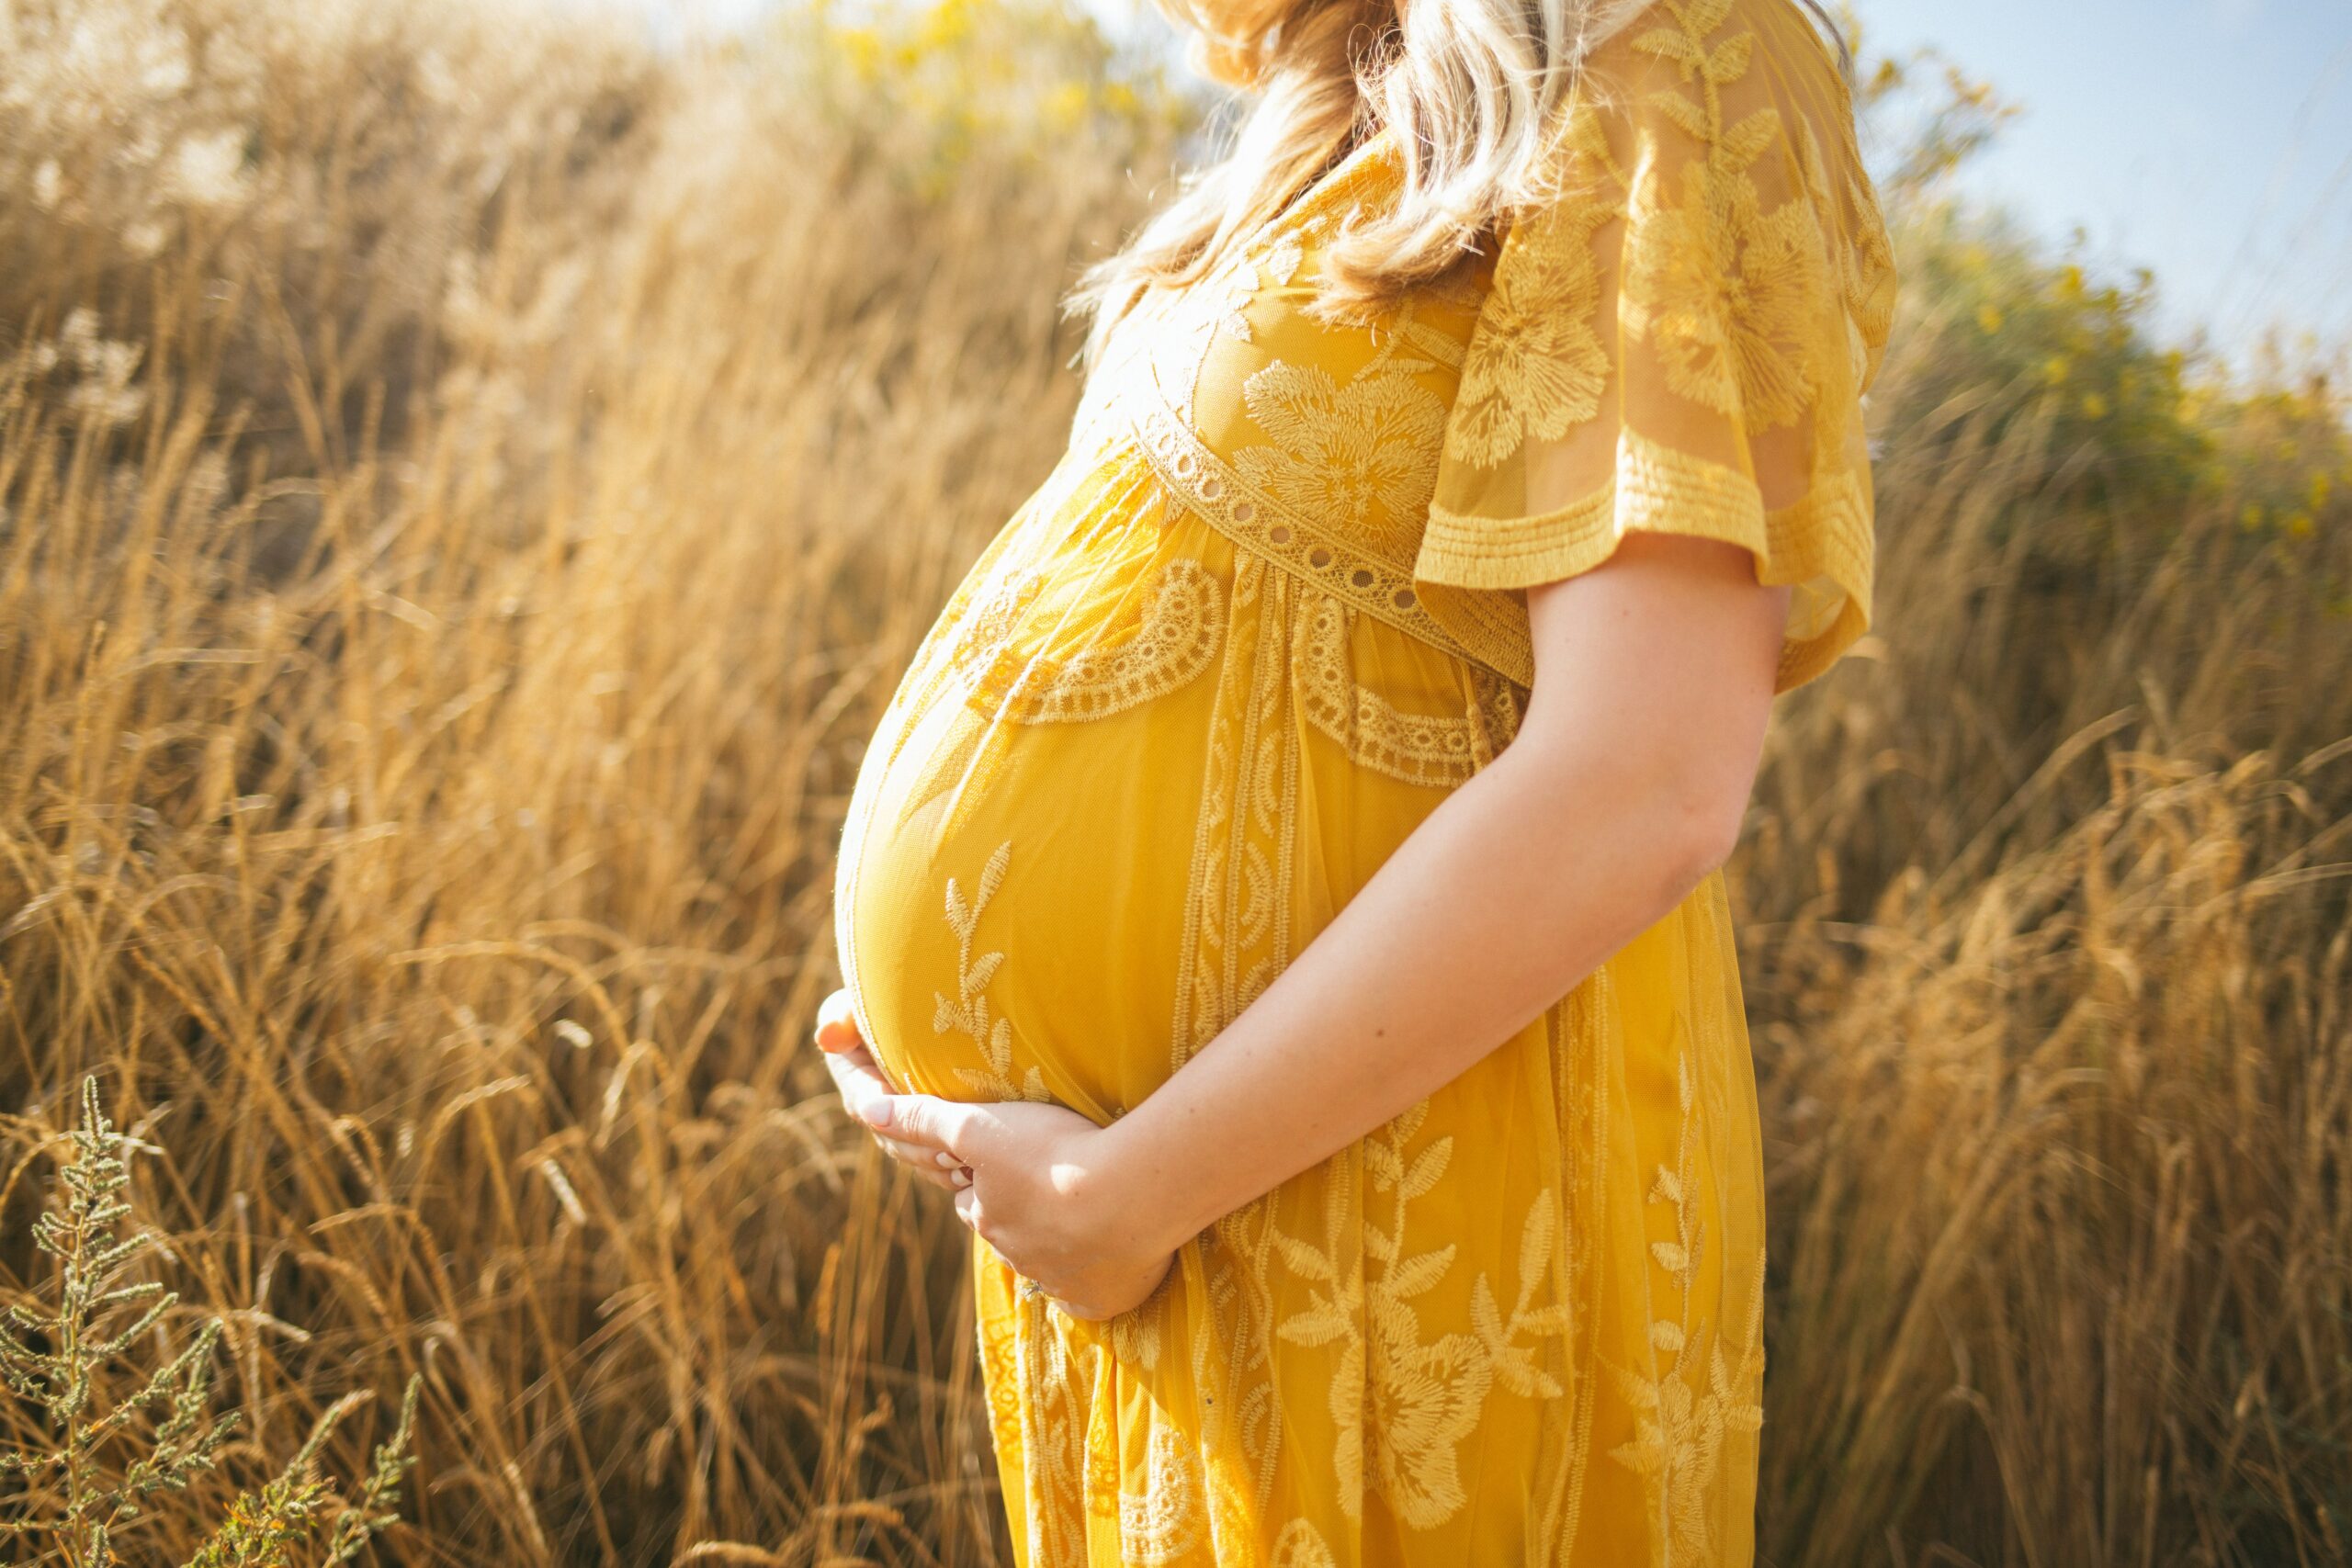 pregnant woman wearing yellow floral dress standing while touching her tummy and facing her right side near brown field during daytime